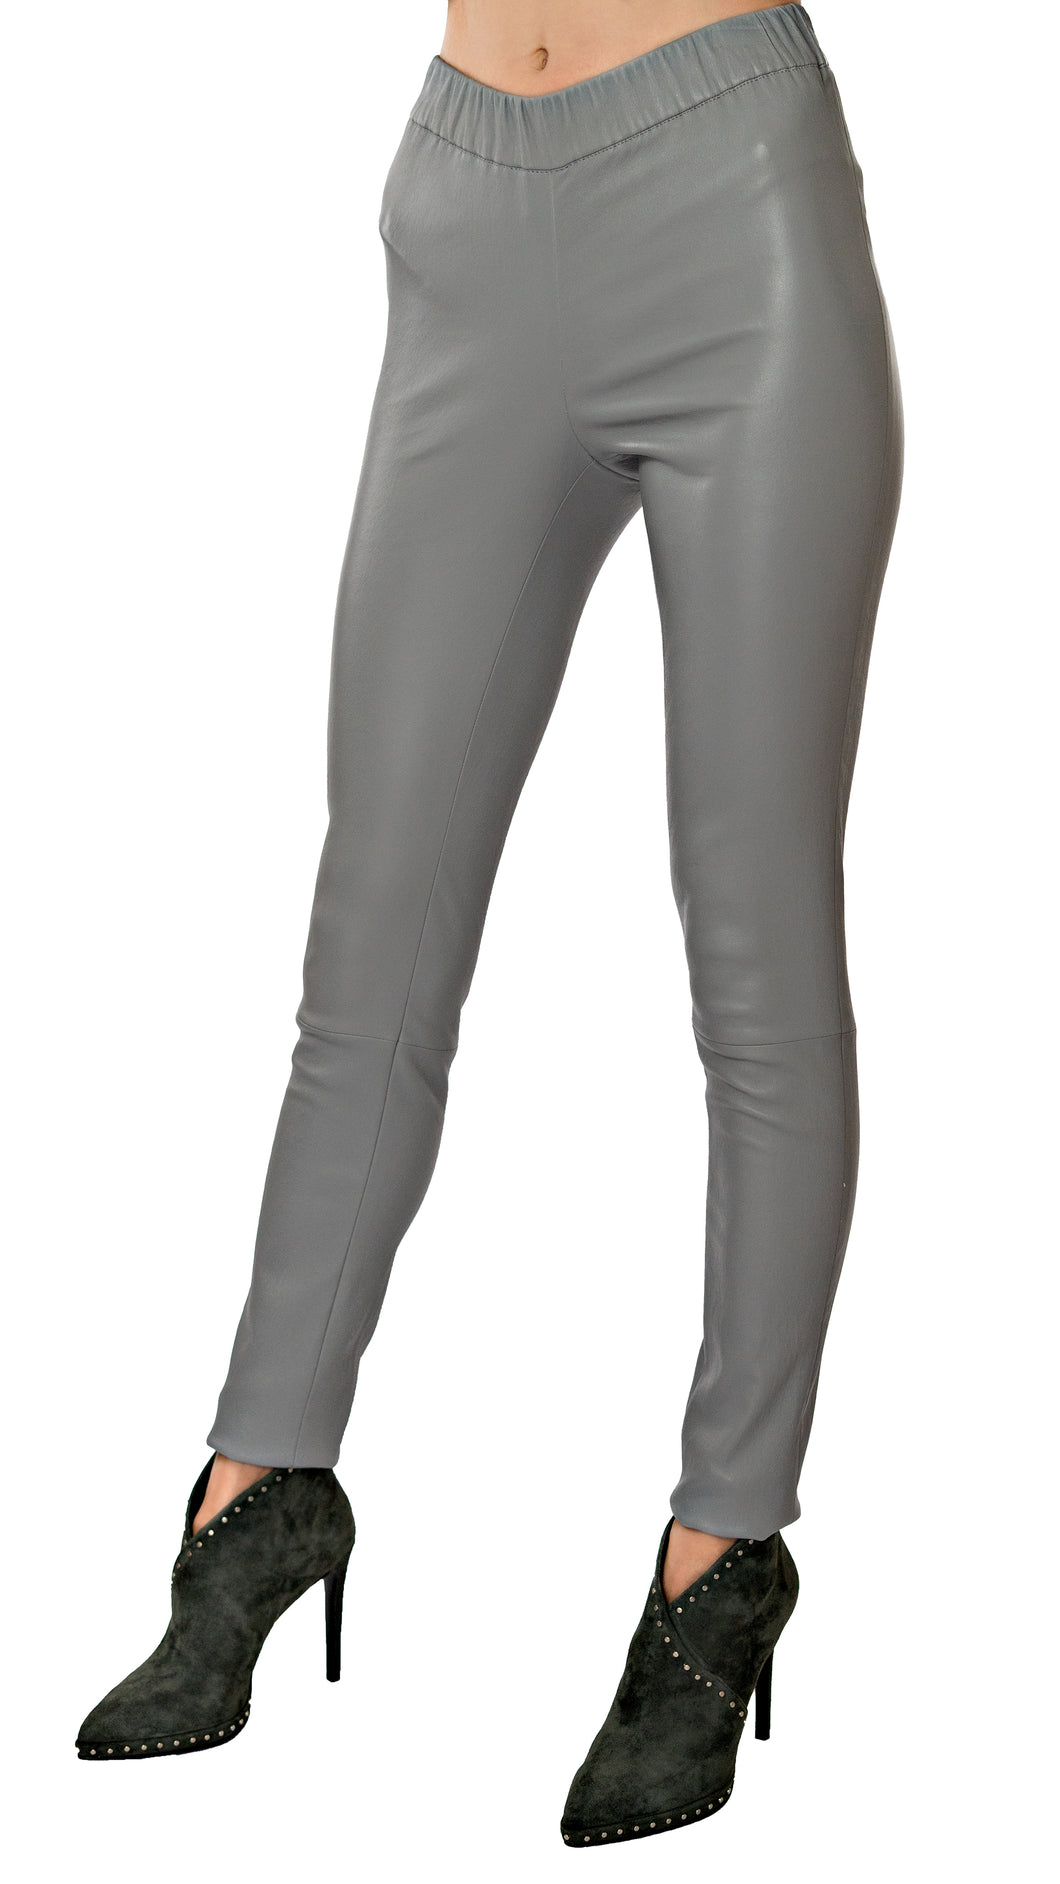 Max and Moi grey real leather legging 